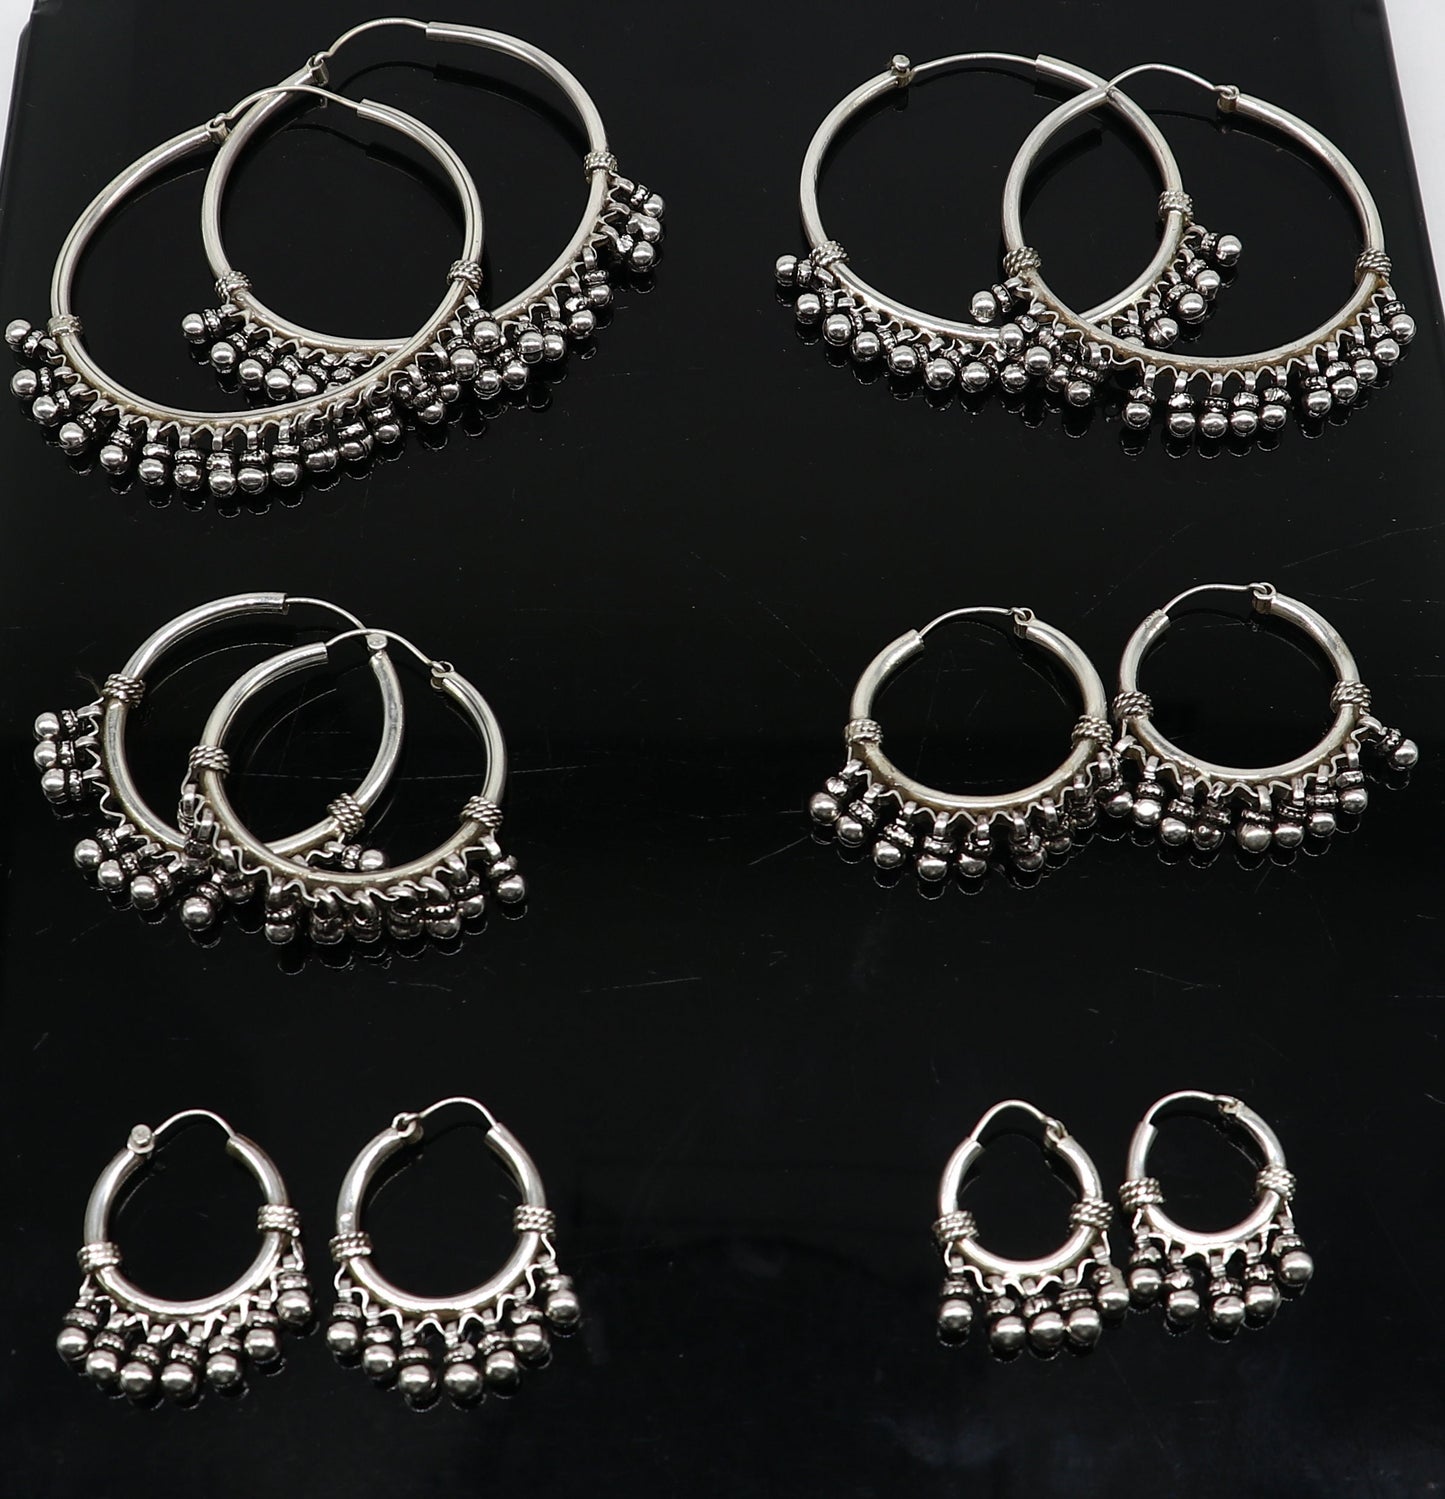 All sizes 925 sterling silver handmade hoop earring, fabulous Bali pair, silver hook, hoop gifting gorgeous tribal customized jewelry s1200 - TRIBAL ORNAMENTS